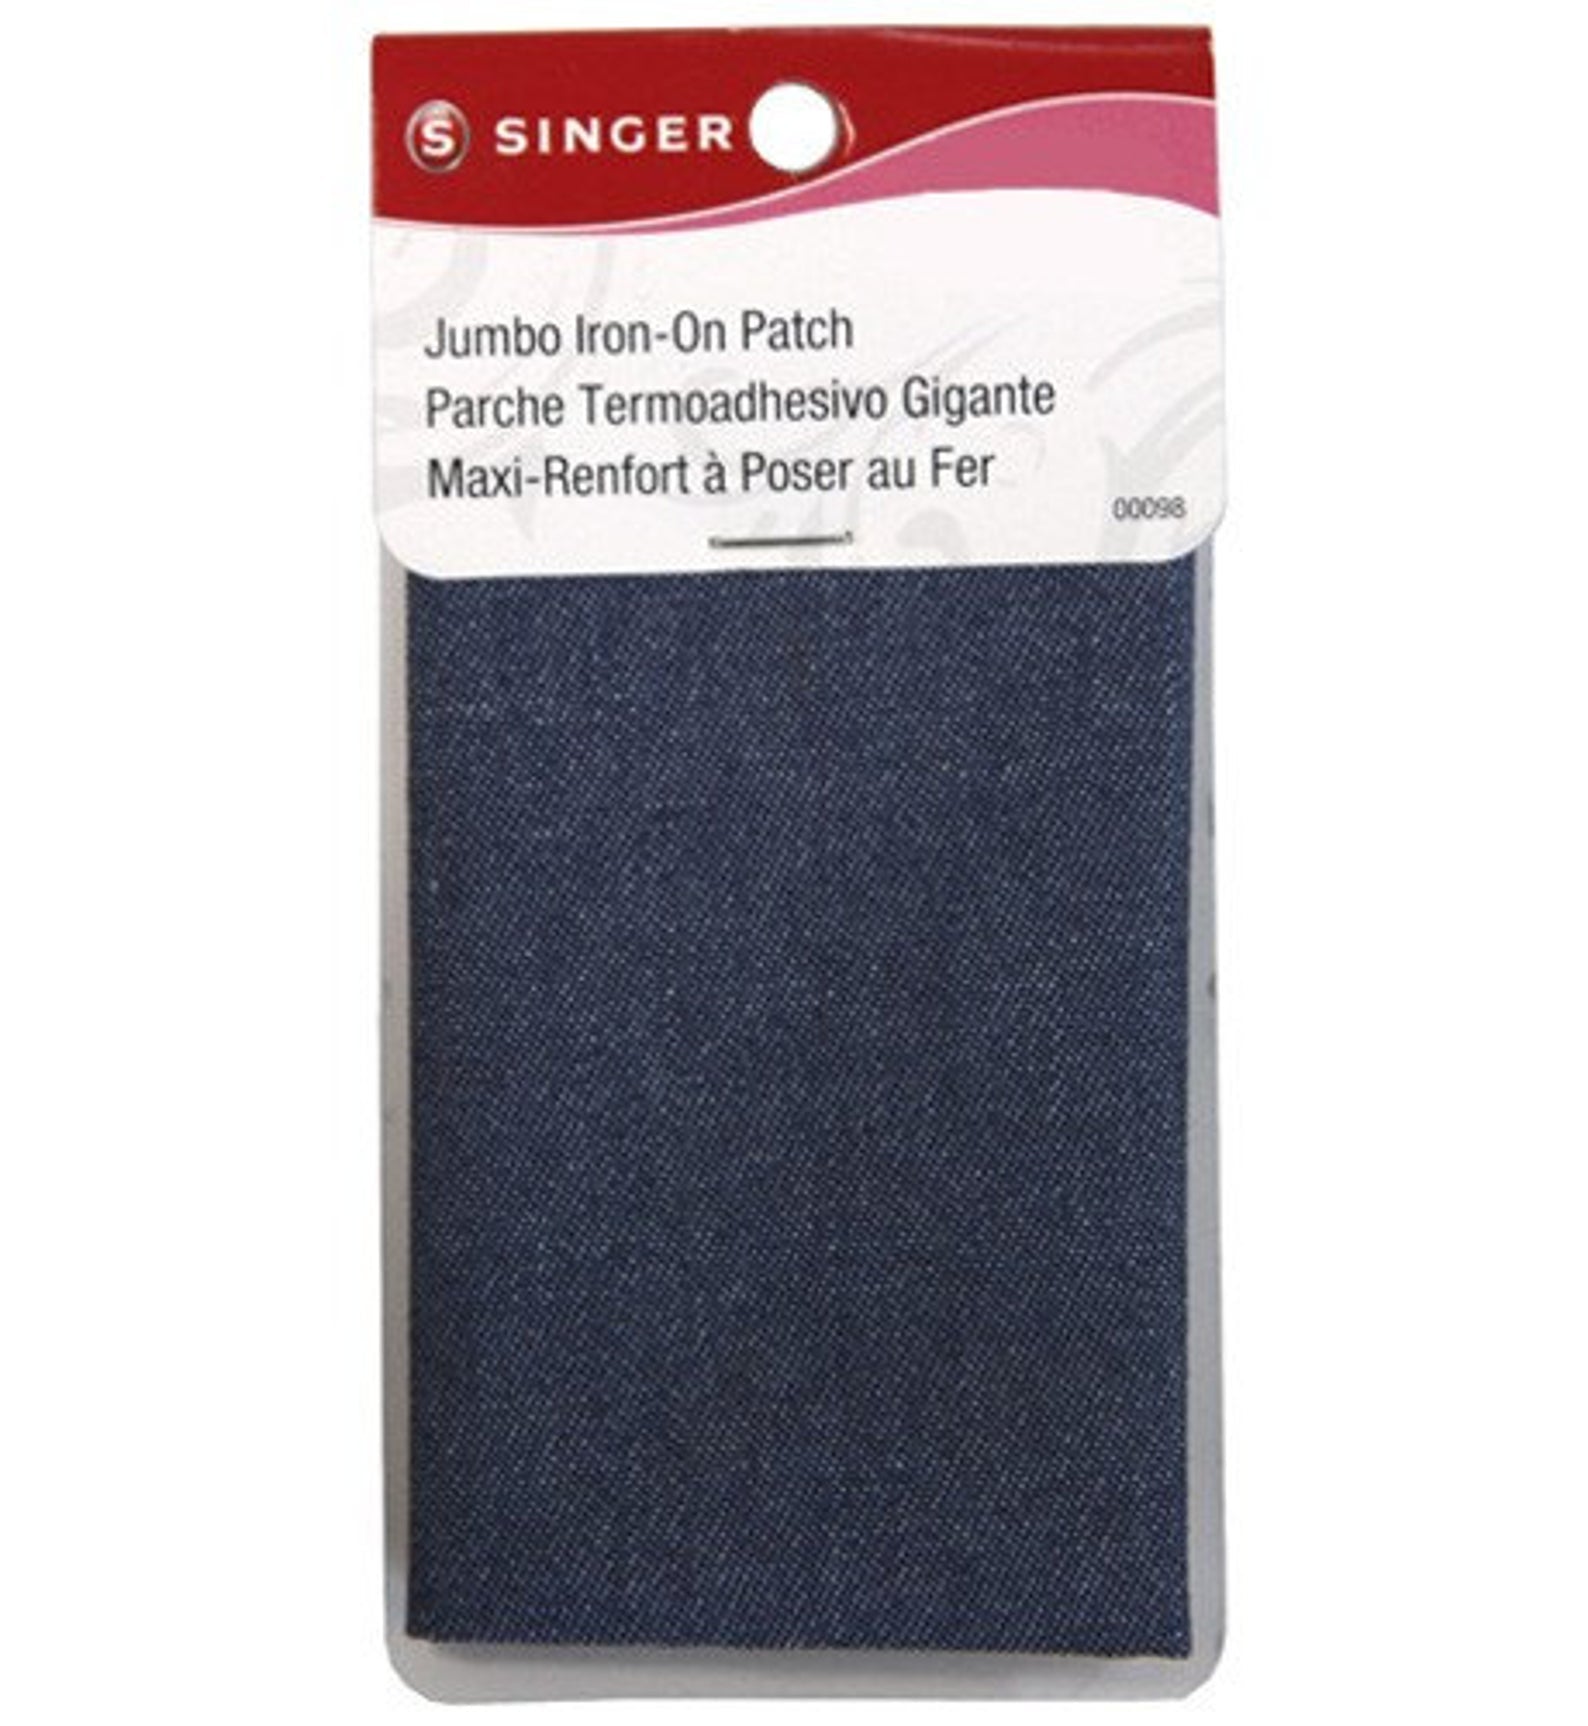 SINGER Iron-On Patches - Black